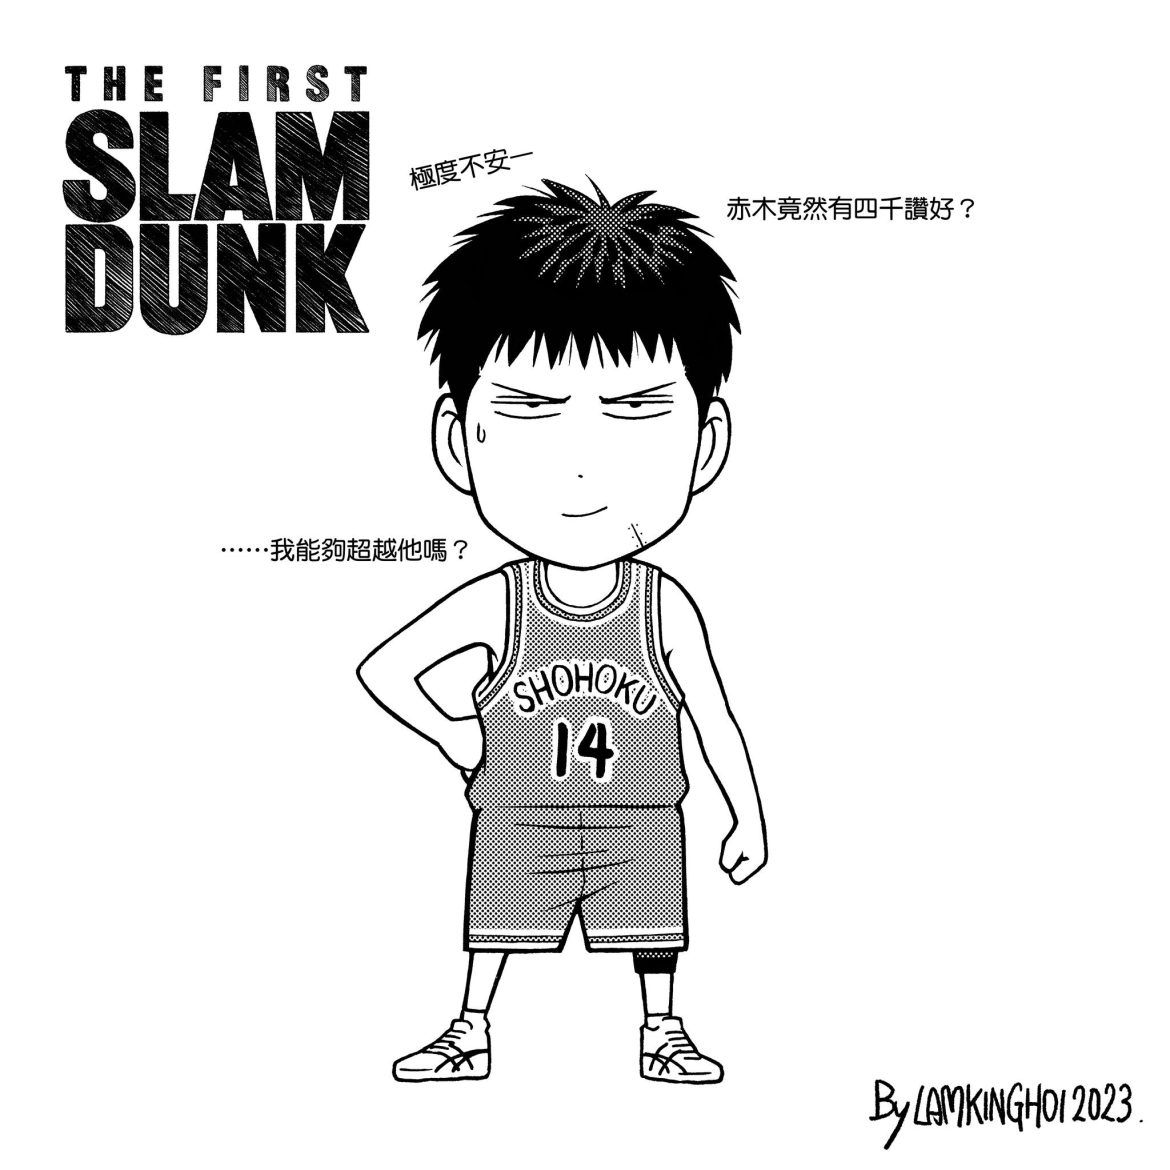 The First Slam Dunk 來了，are you ready？